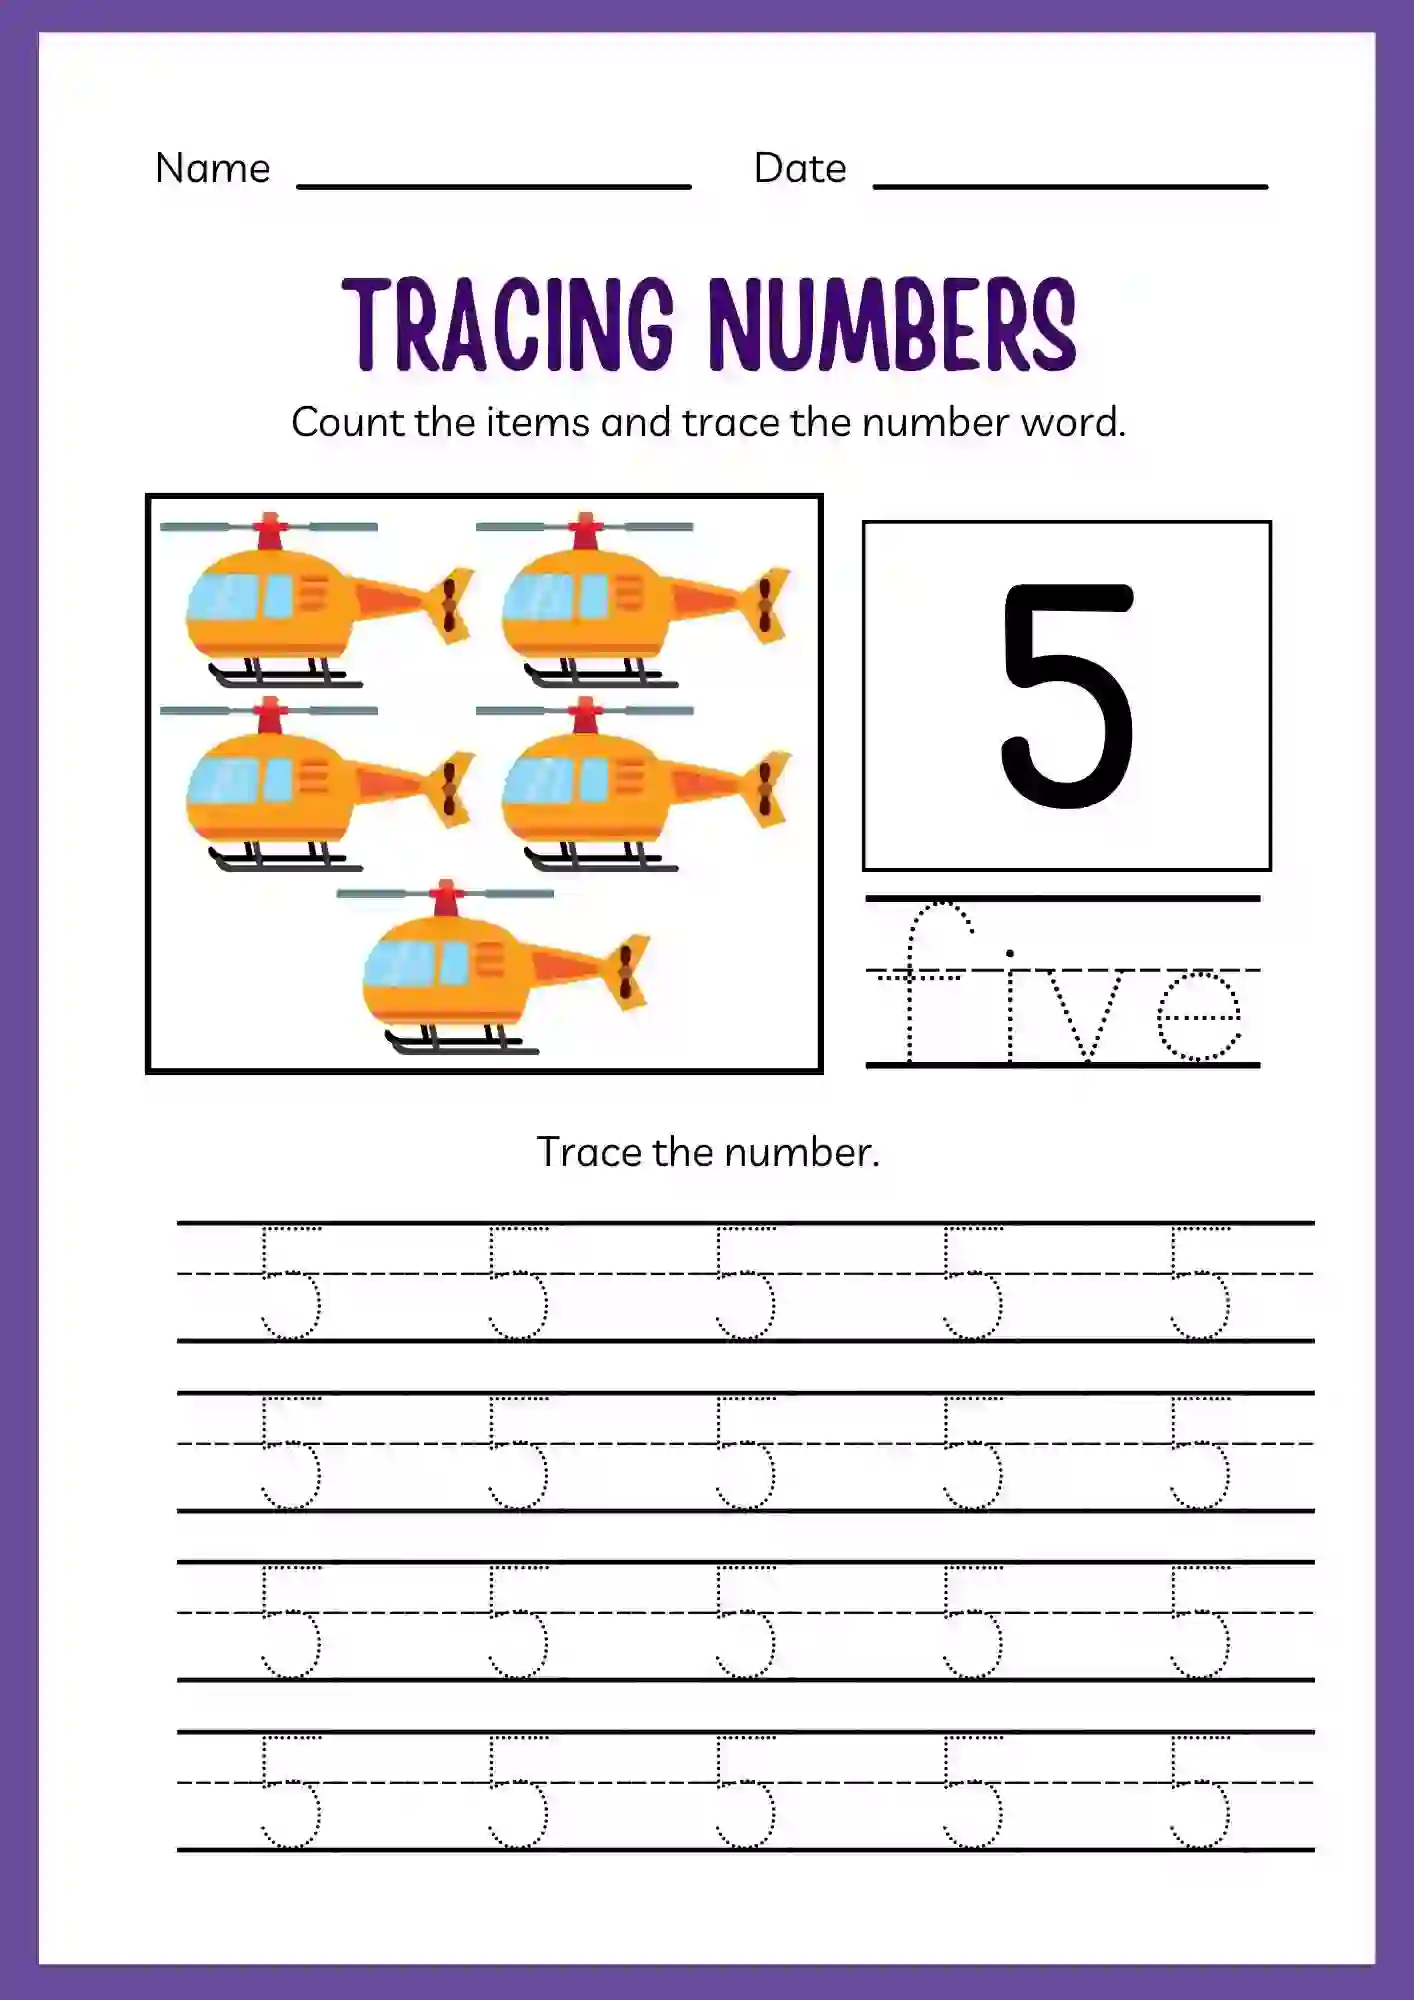 Number Tracing Worksheets 1 to 20 (Number 5 tracing sheet)